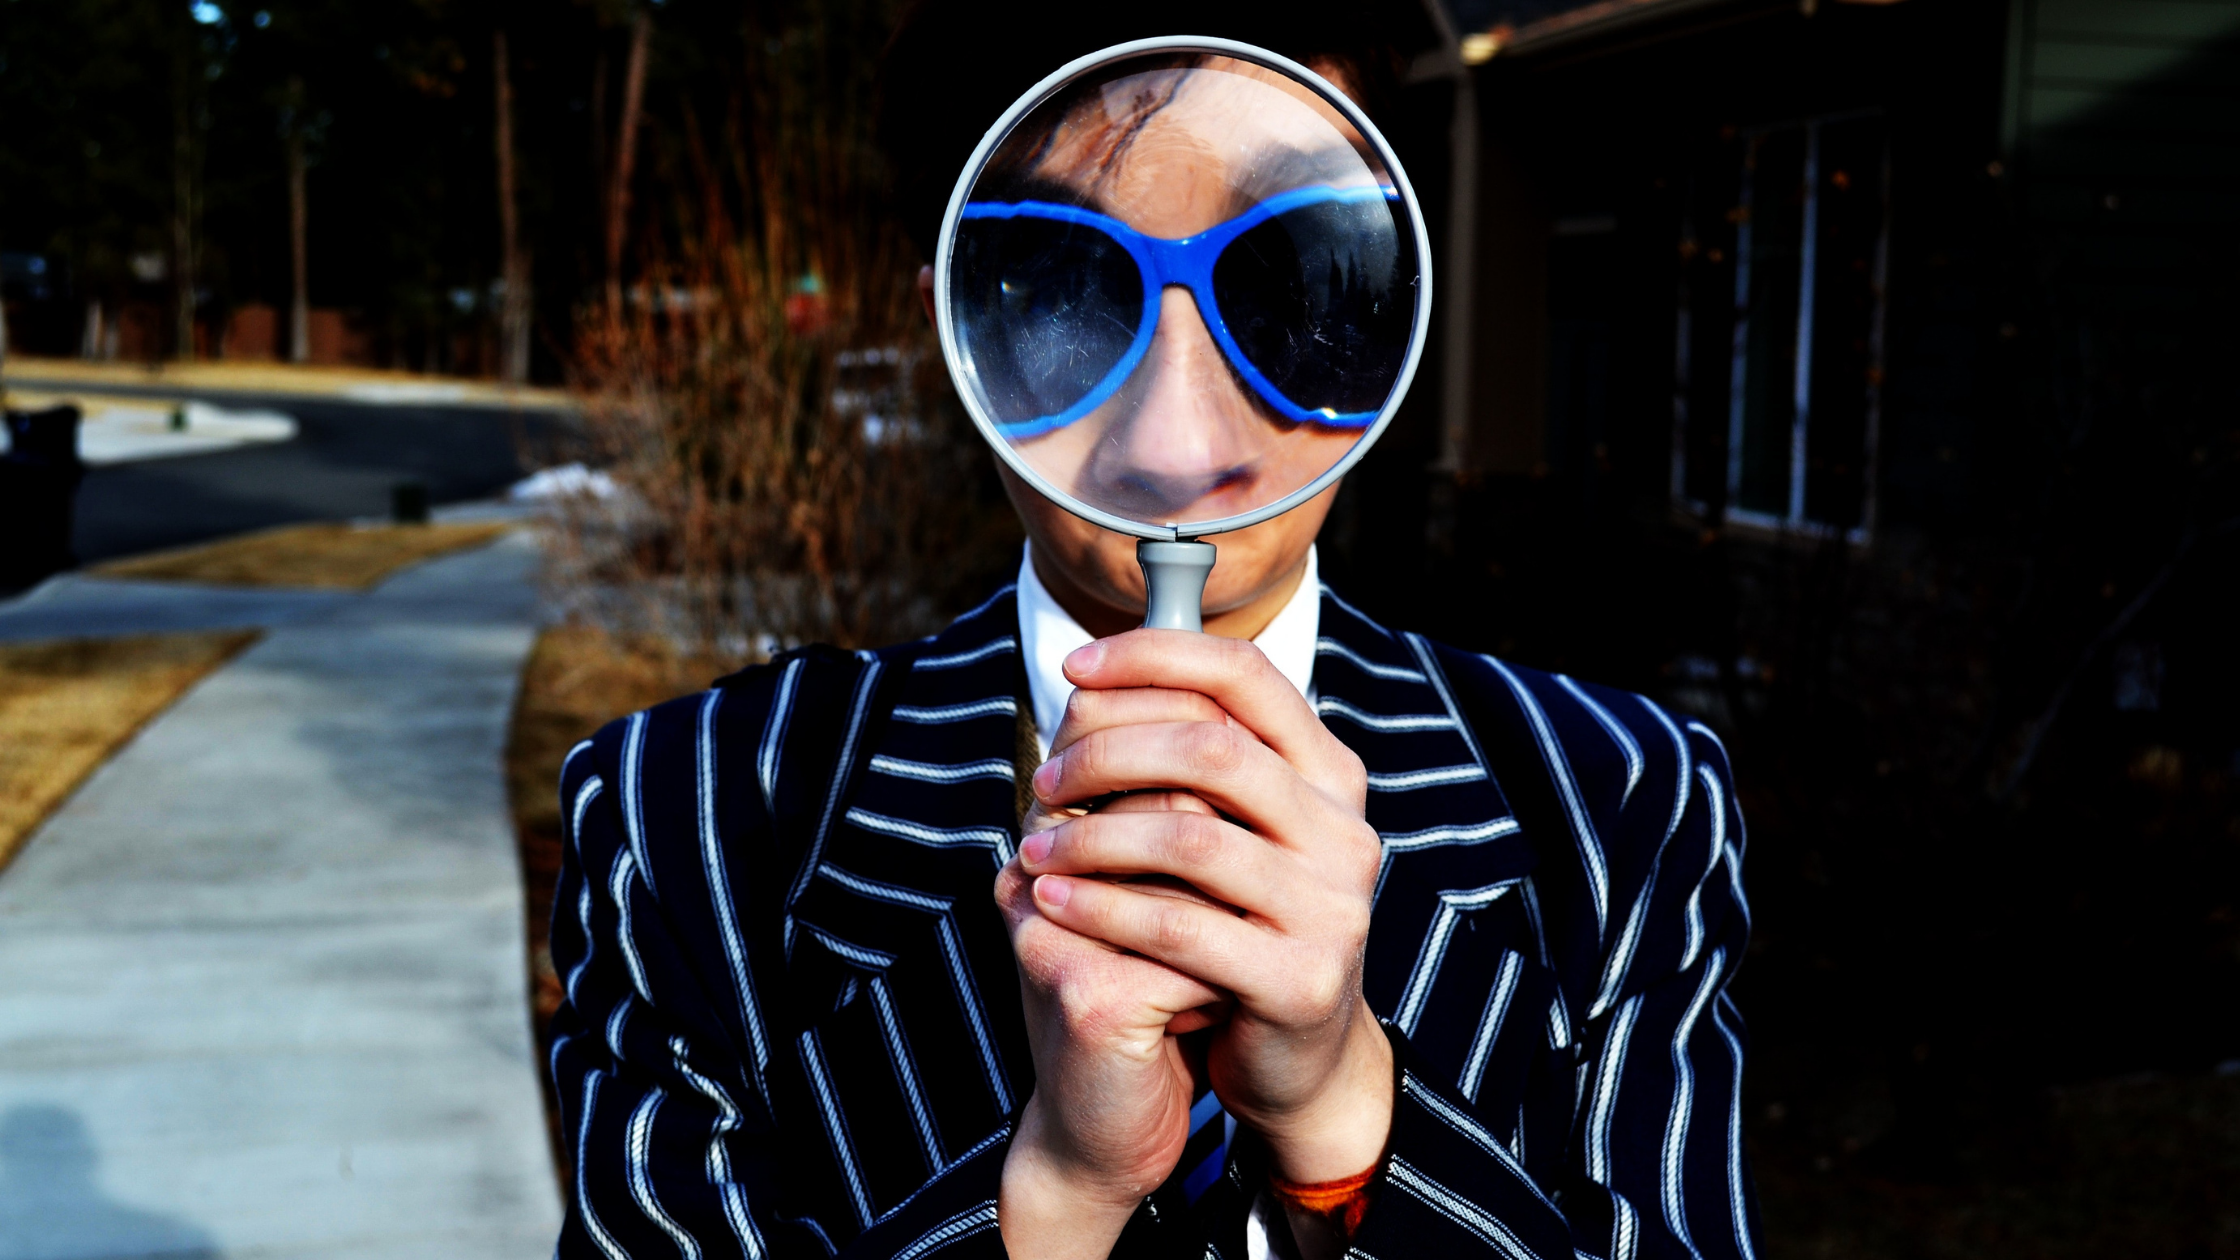 A person in a pinstriped suit and sunglasses holds a magnifying glass up to their face